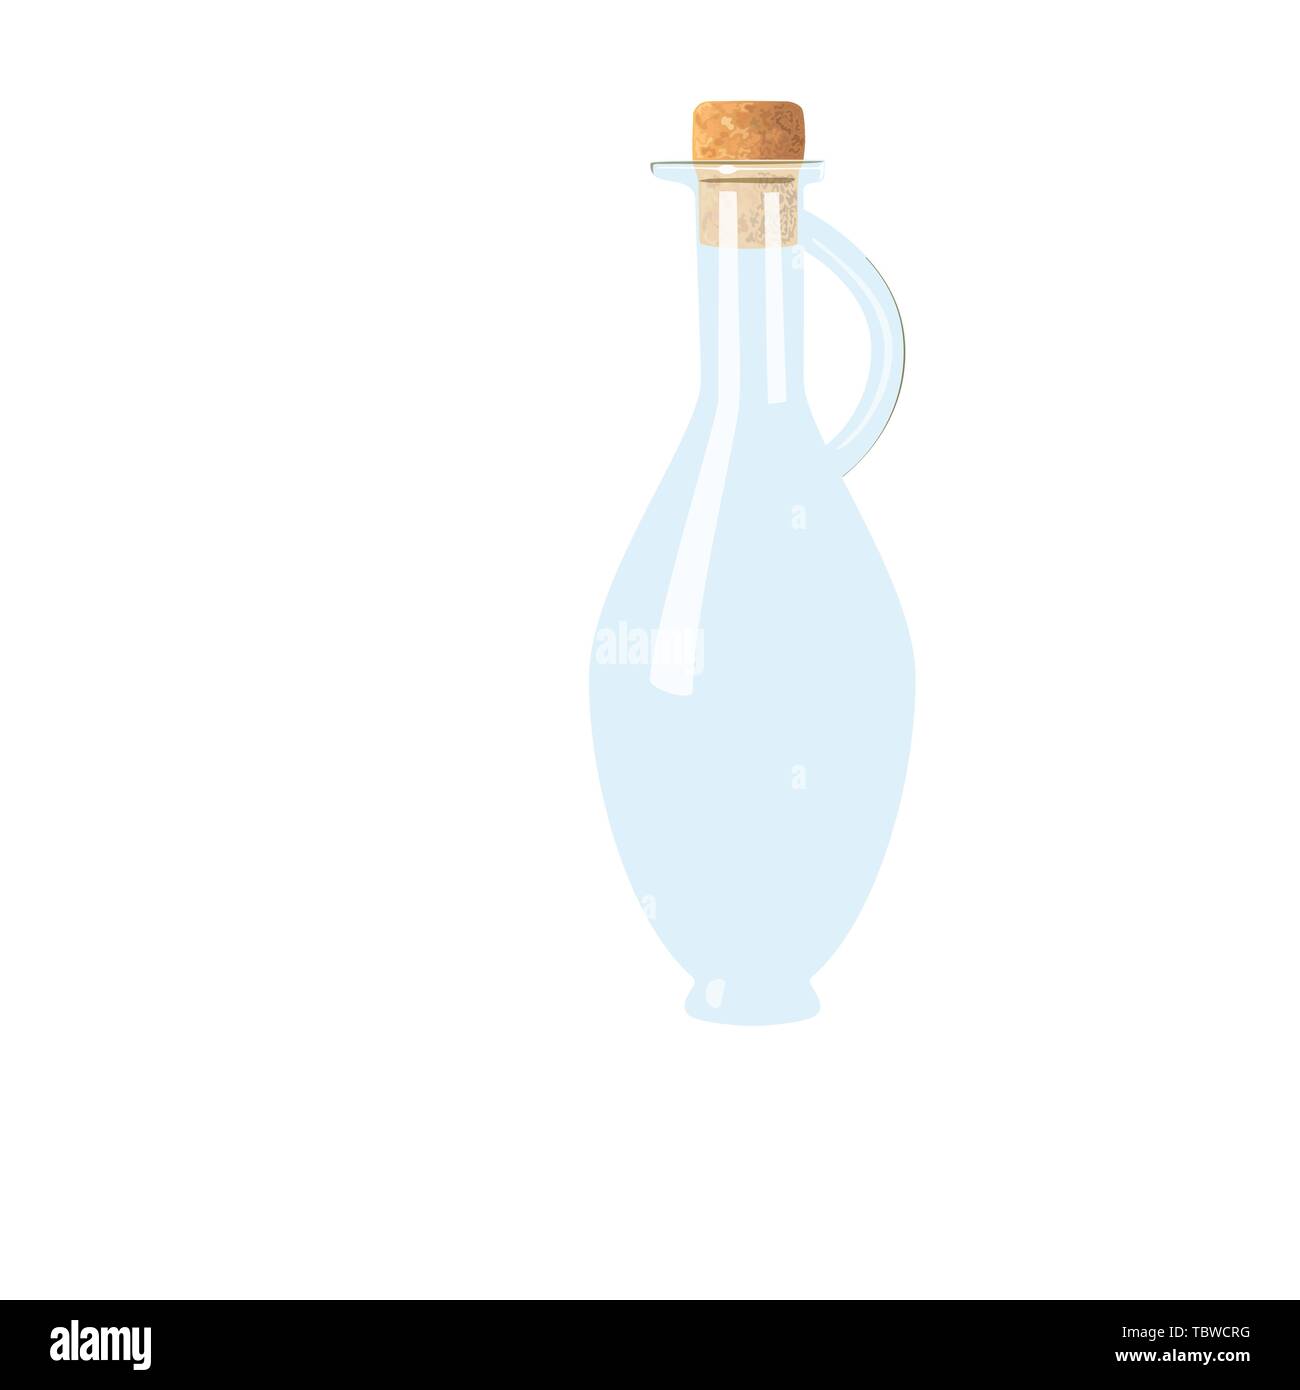 Glass empty flagon with cork, handle. tranparent icy-white decanter on white background. Flask for juice, wine, beer, spirits, oil, alcohol, beverages Stock Vector